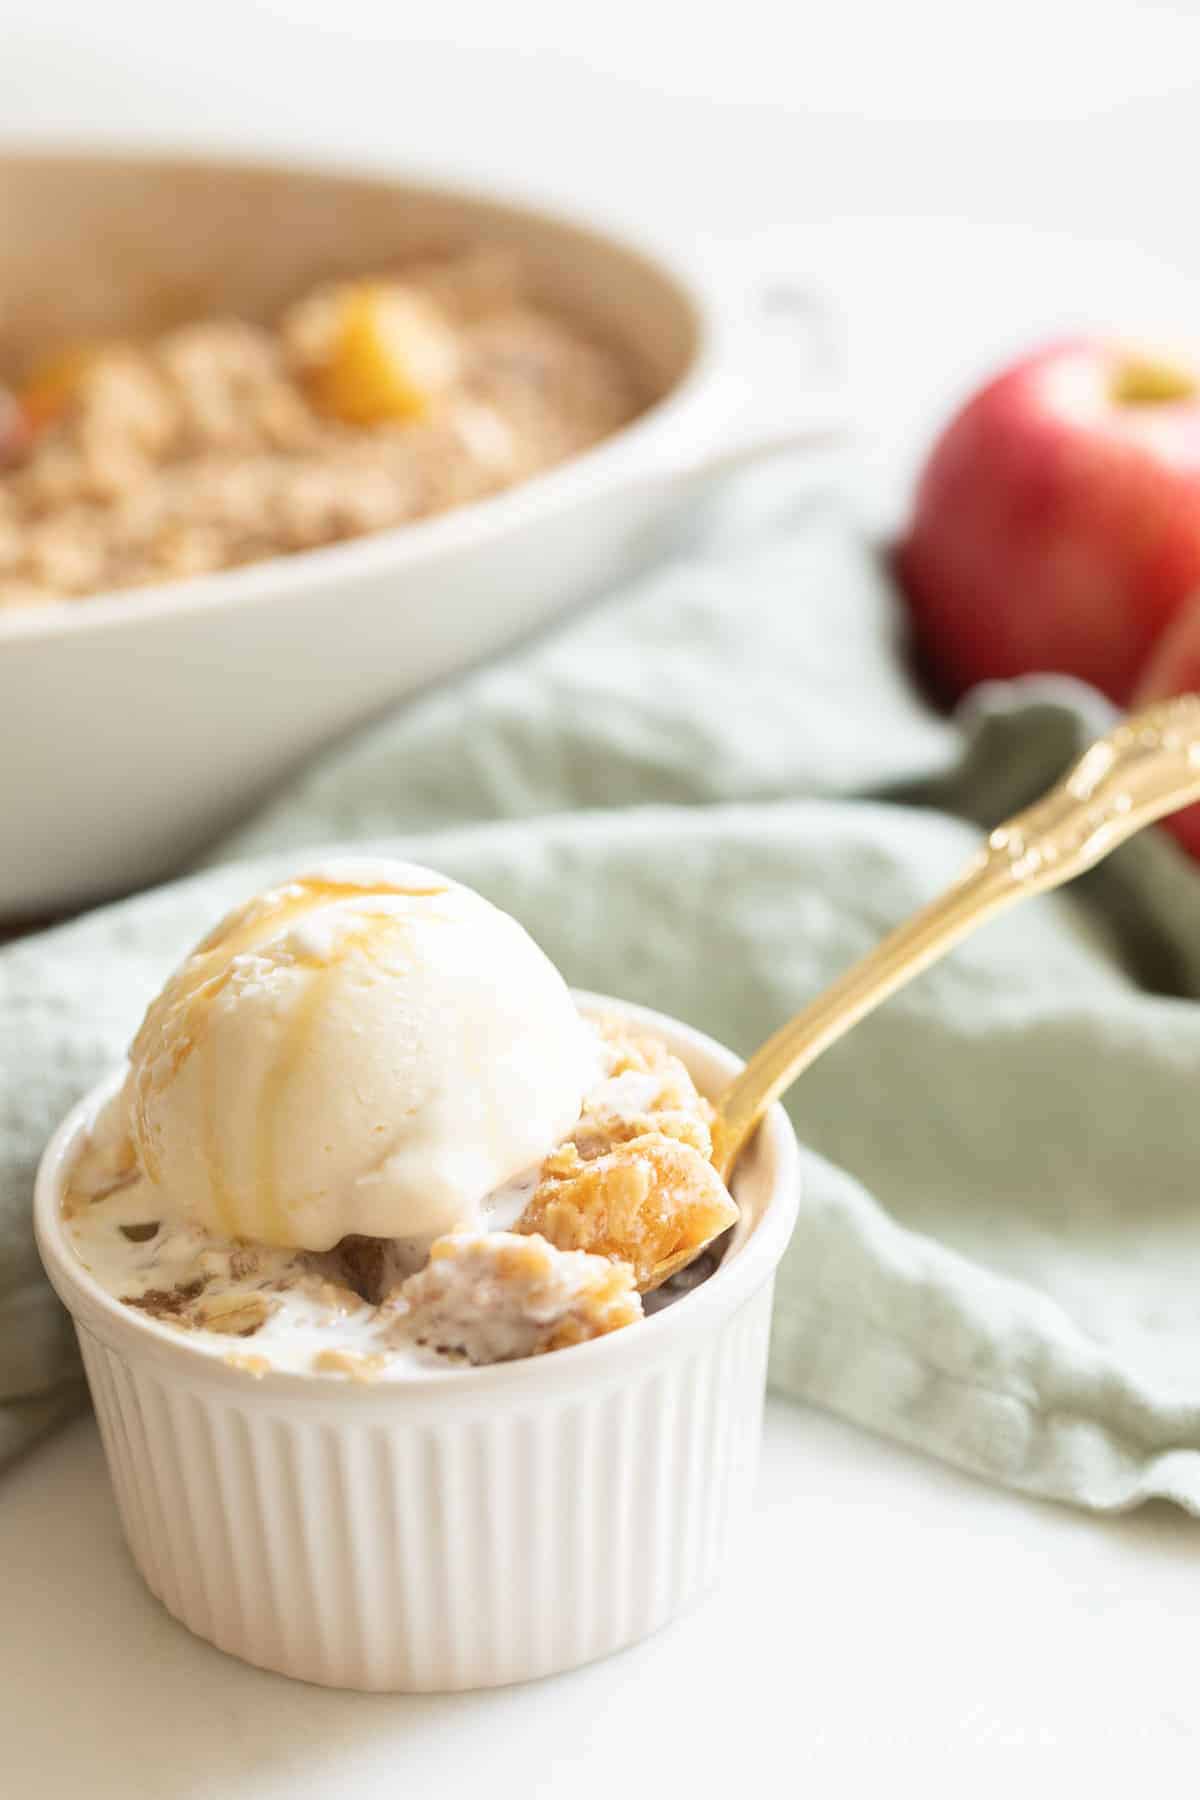 apple crisp in a bowl with ice cream and spoon